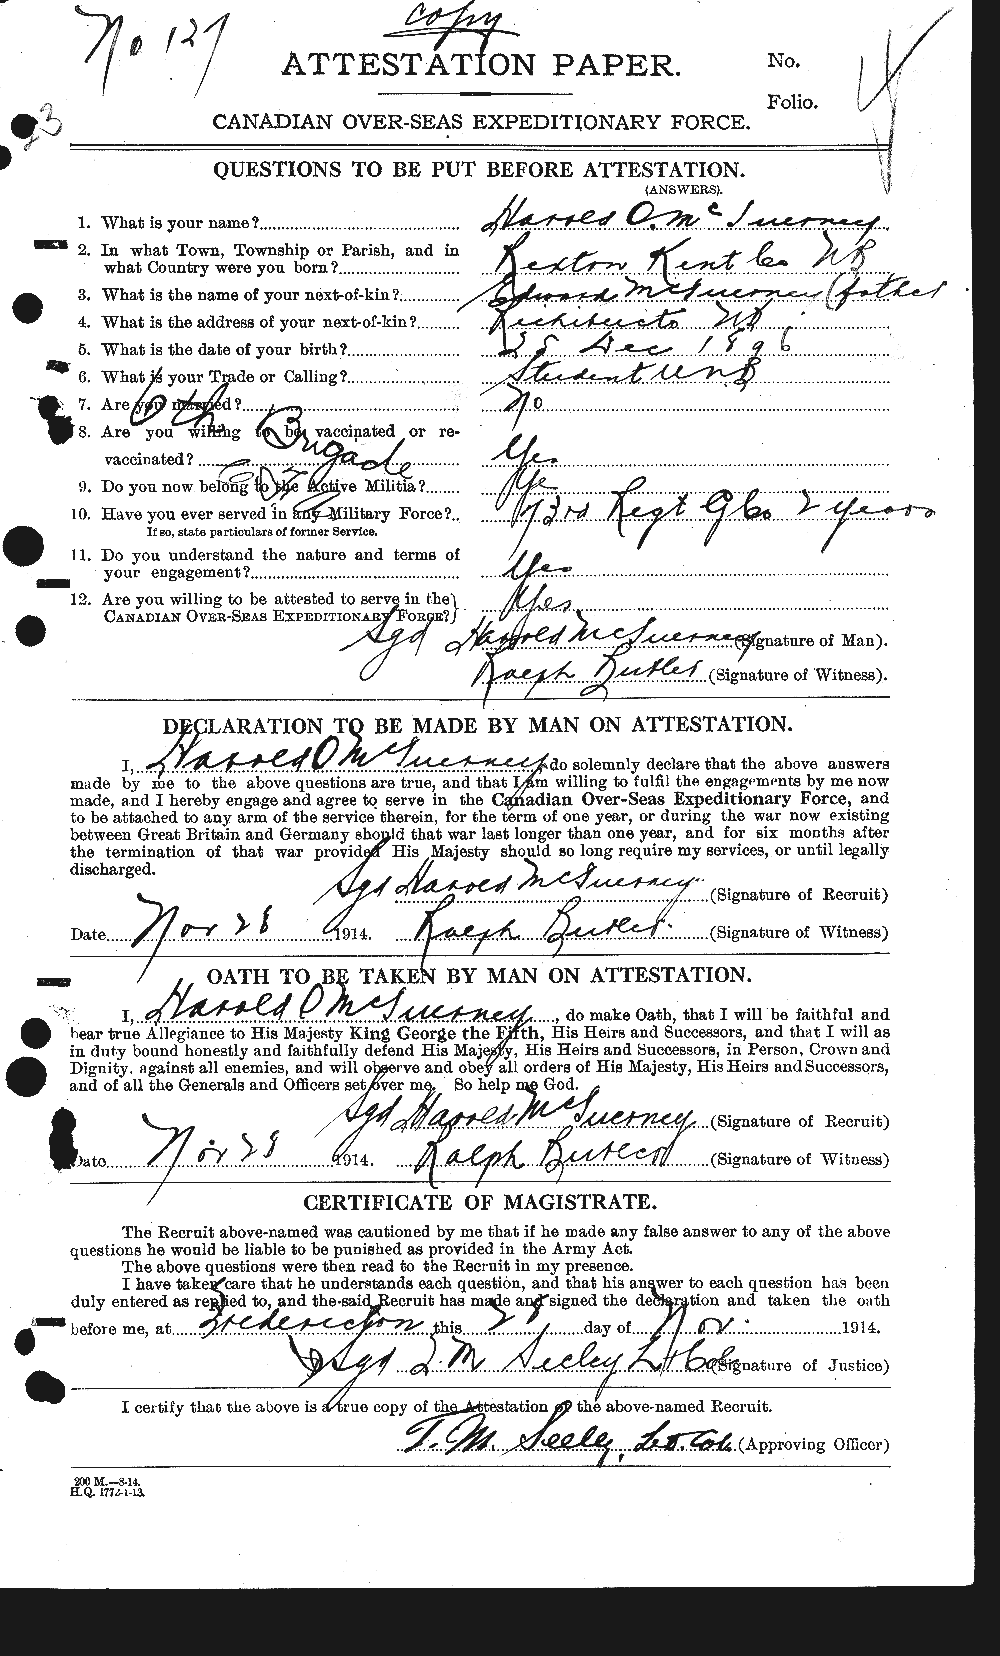 Personnel Records of the First World War - CEF 526577a